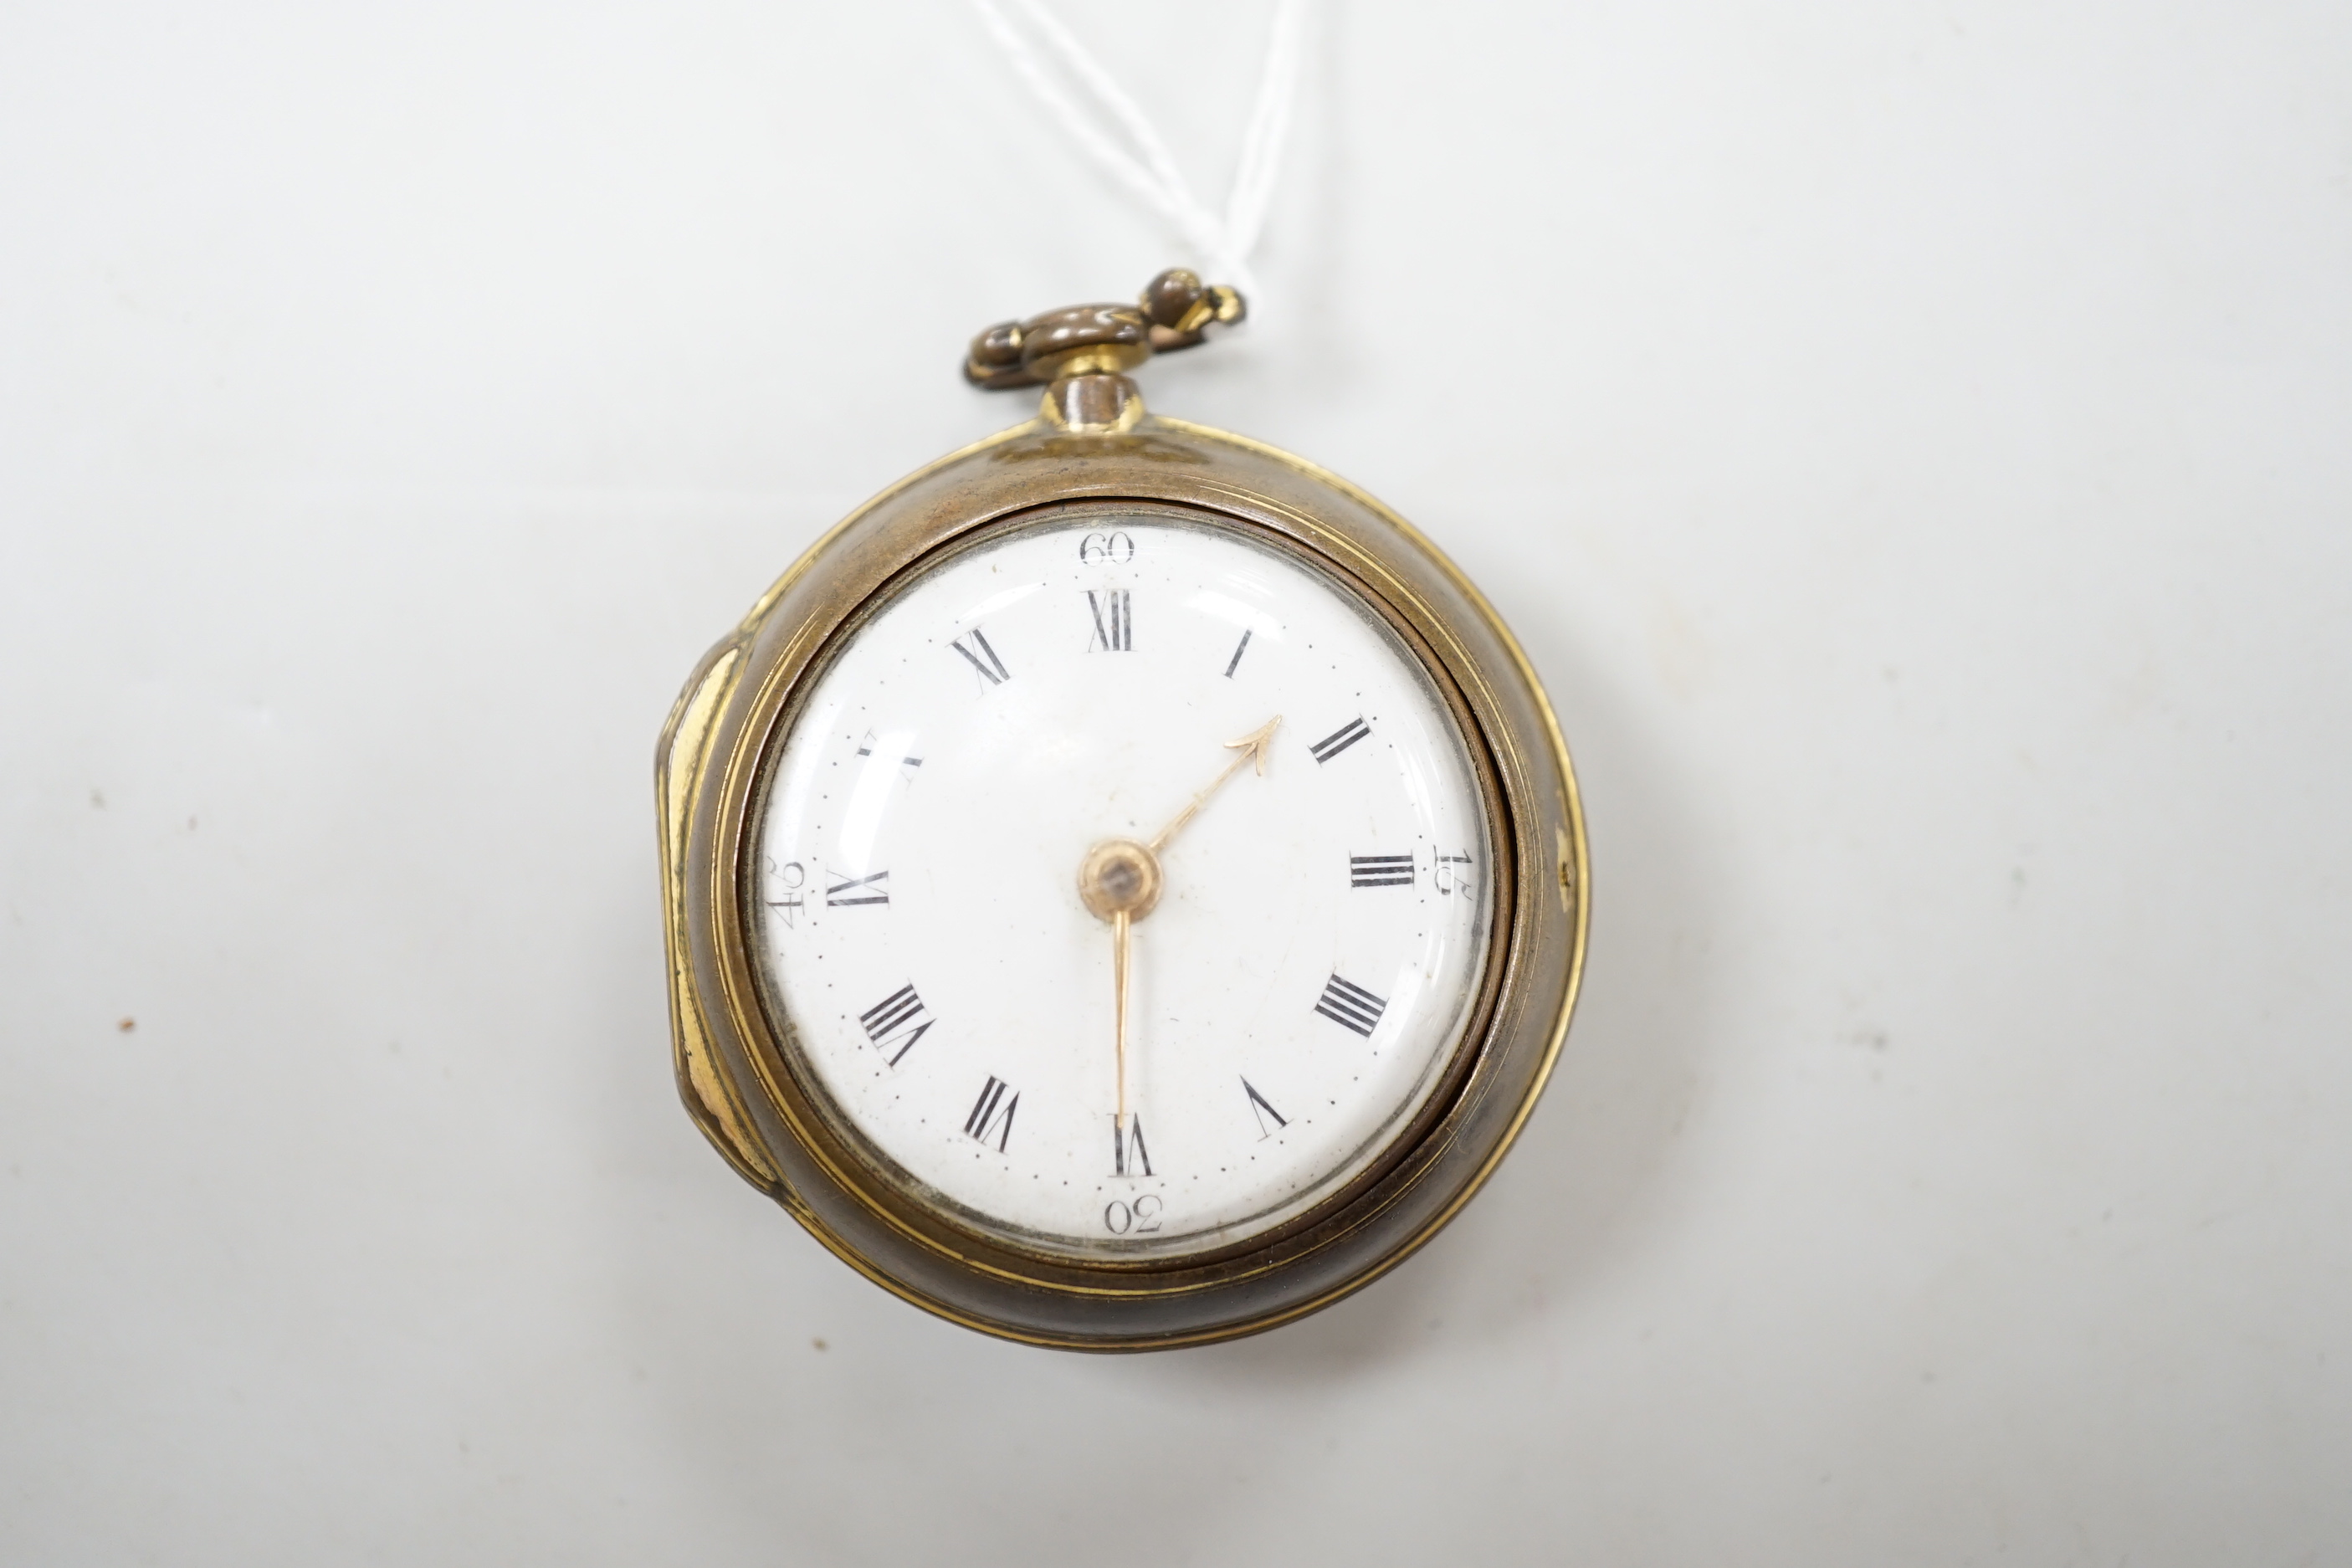 An 18th century gilt metal pair cased keywind verge pocket watch, by William Hope, London, with Roman dial, the signed movement numbered 1523.